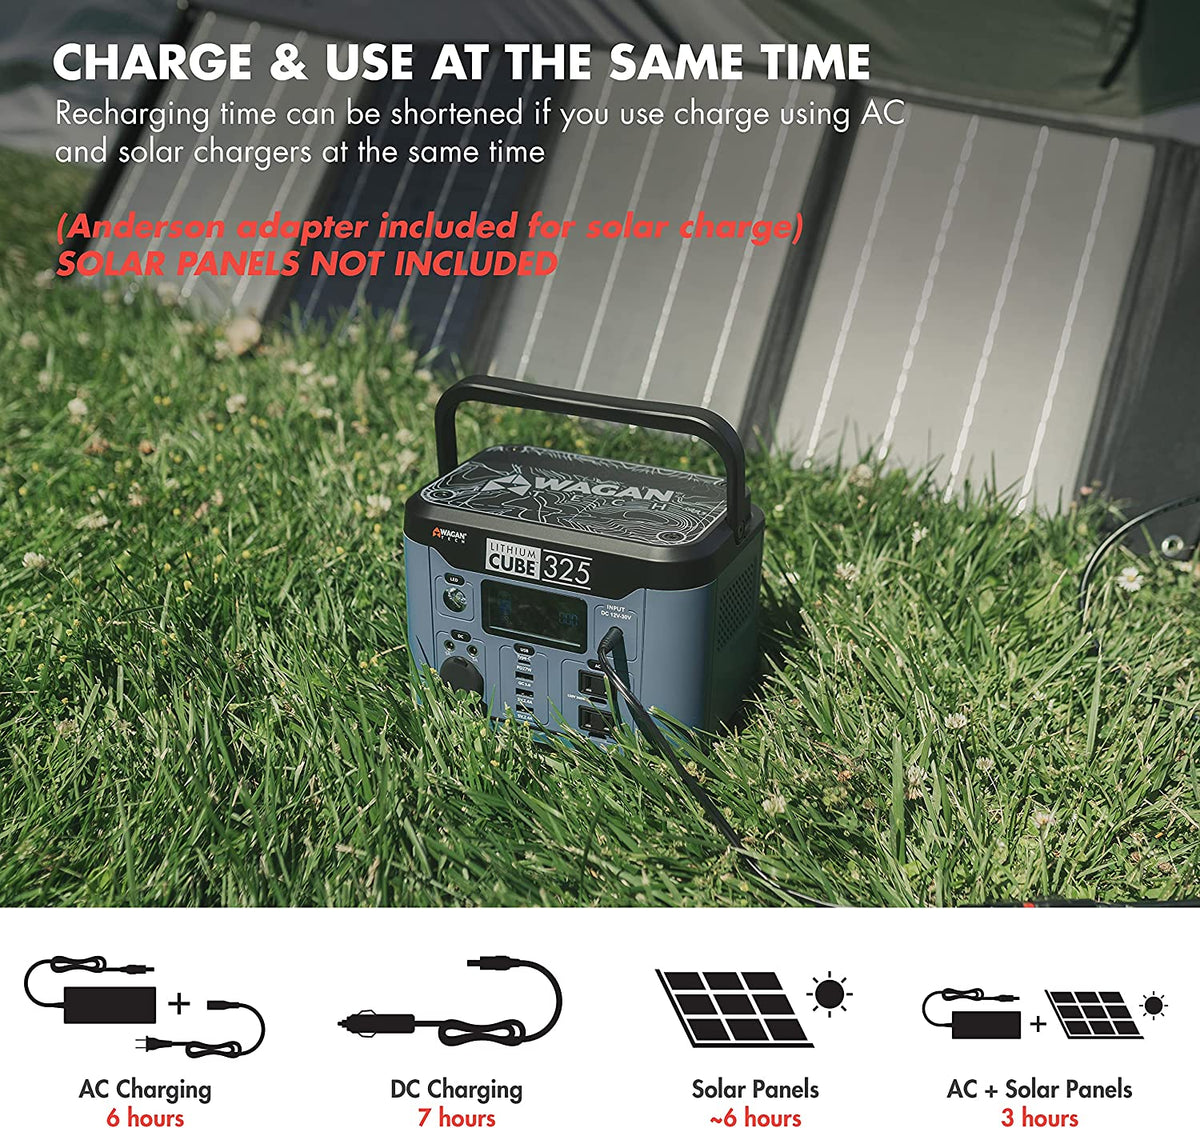 Wagan 8832 Lithium Cube 325 Portable Power Station 324Wh Backup Lithium Battery New